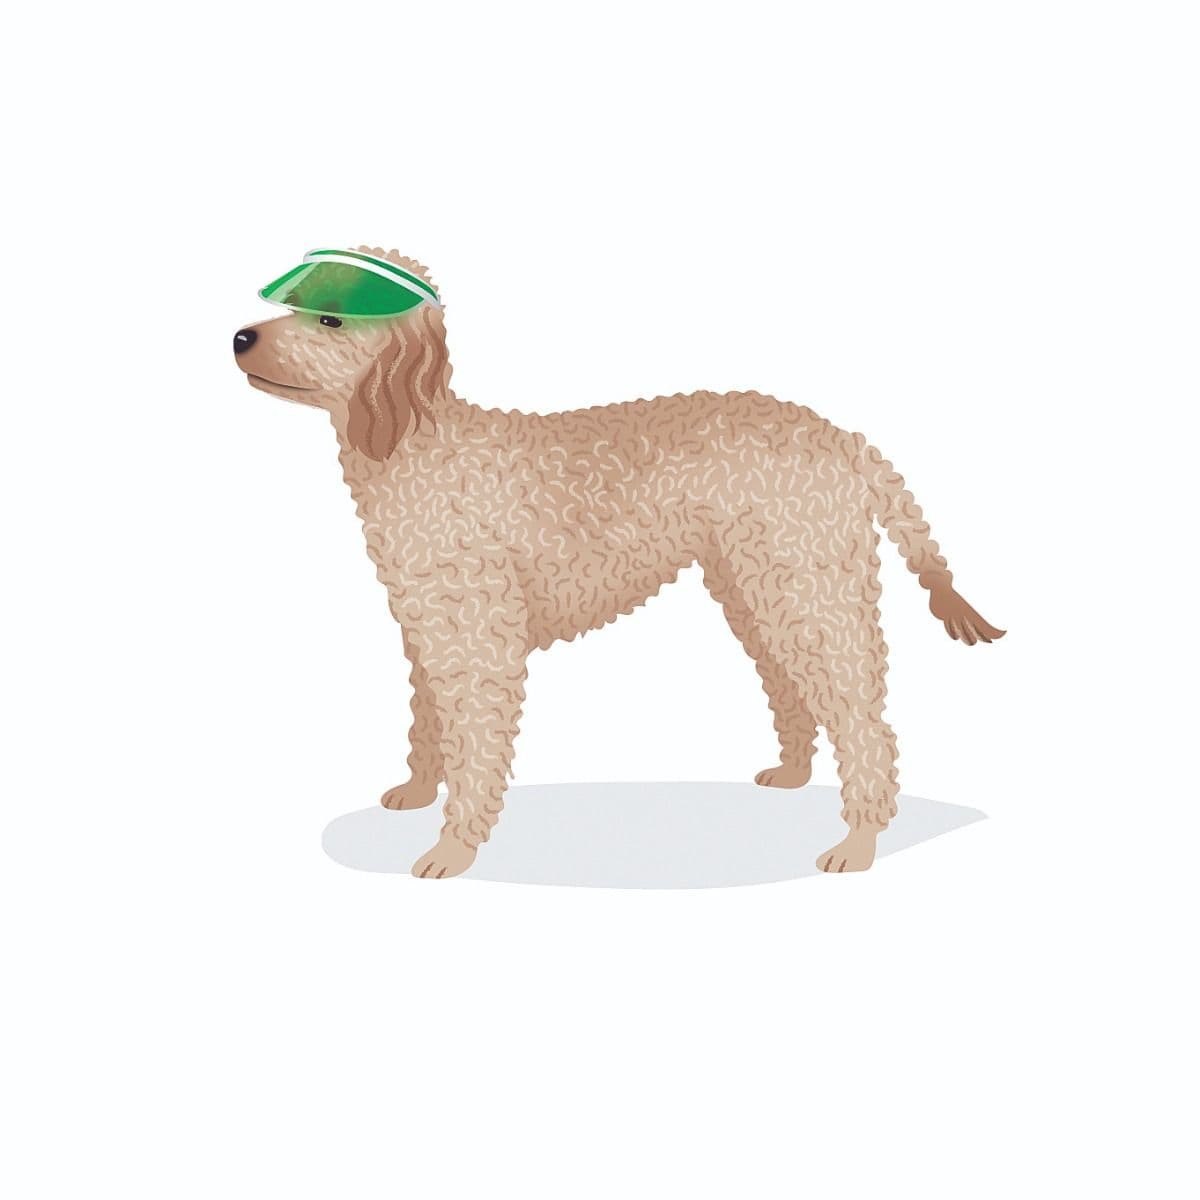 oodle in a Tennis hat